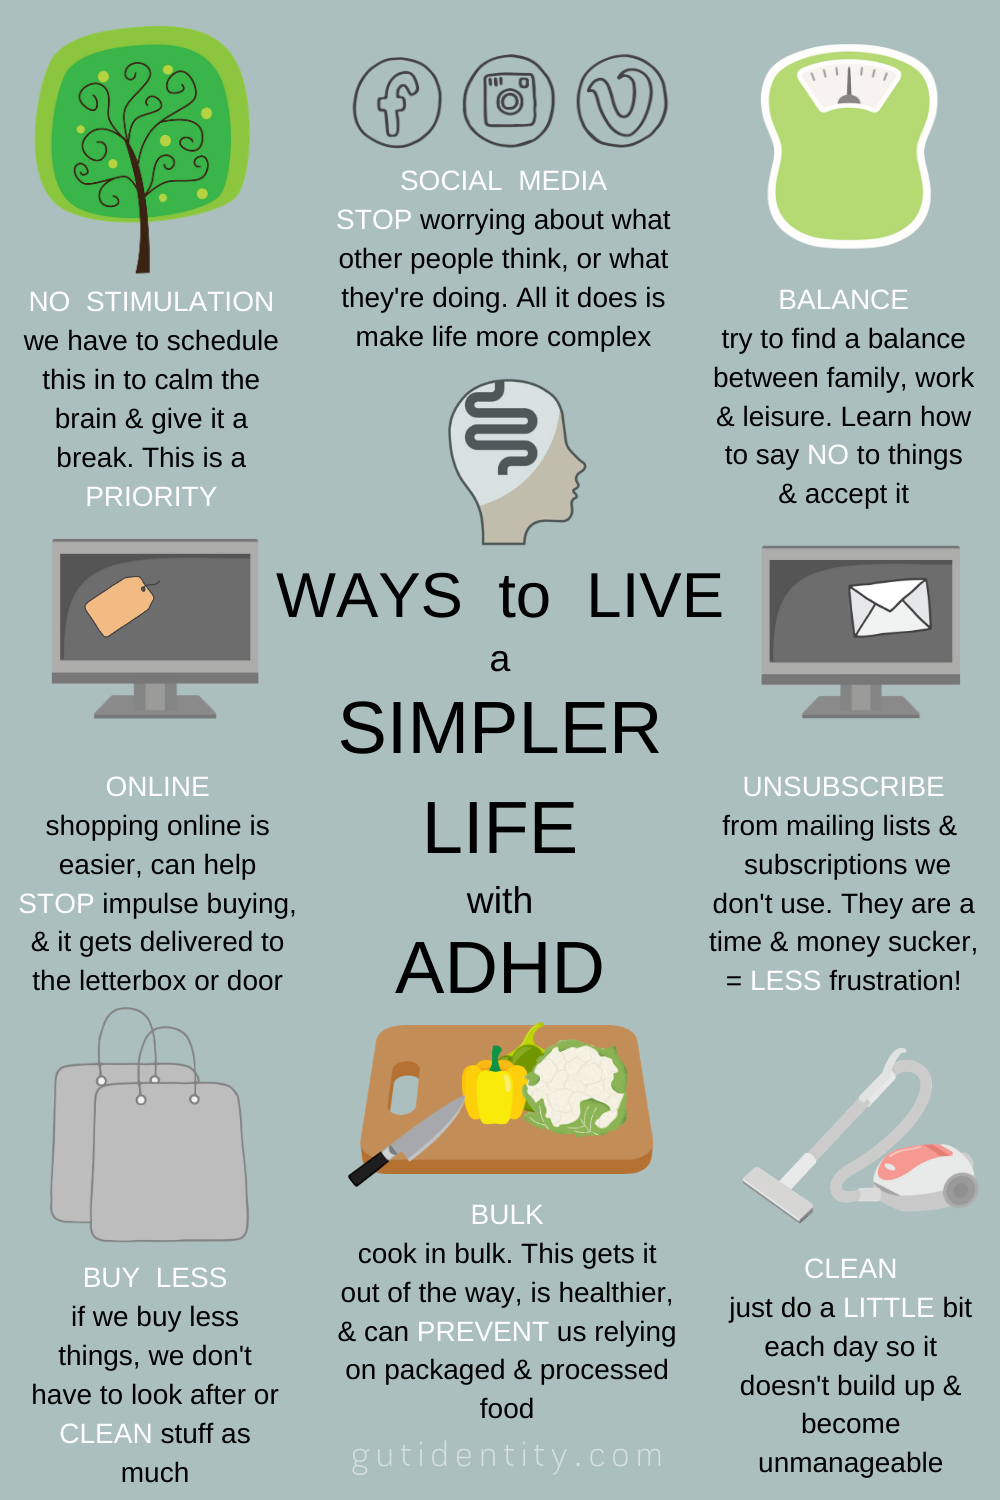 Living a Simpler Life with ADHD by Gutidentity